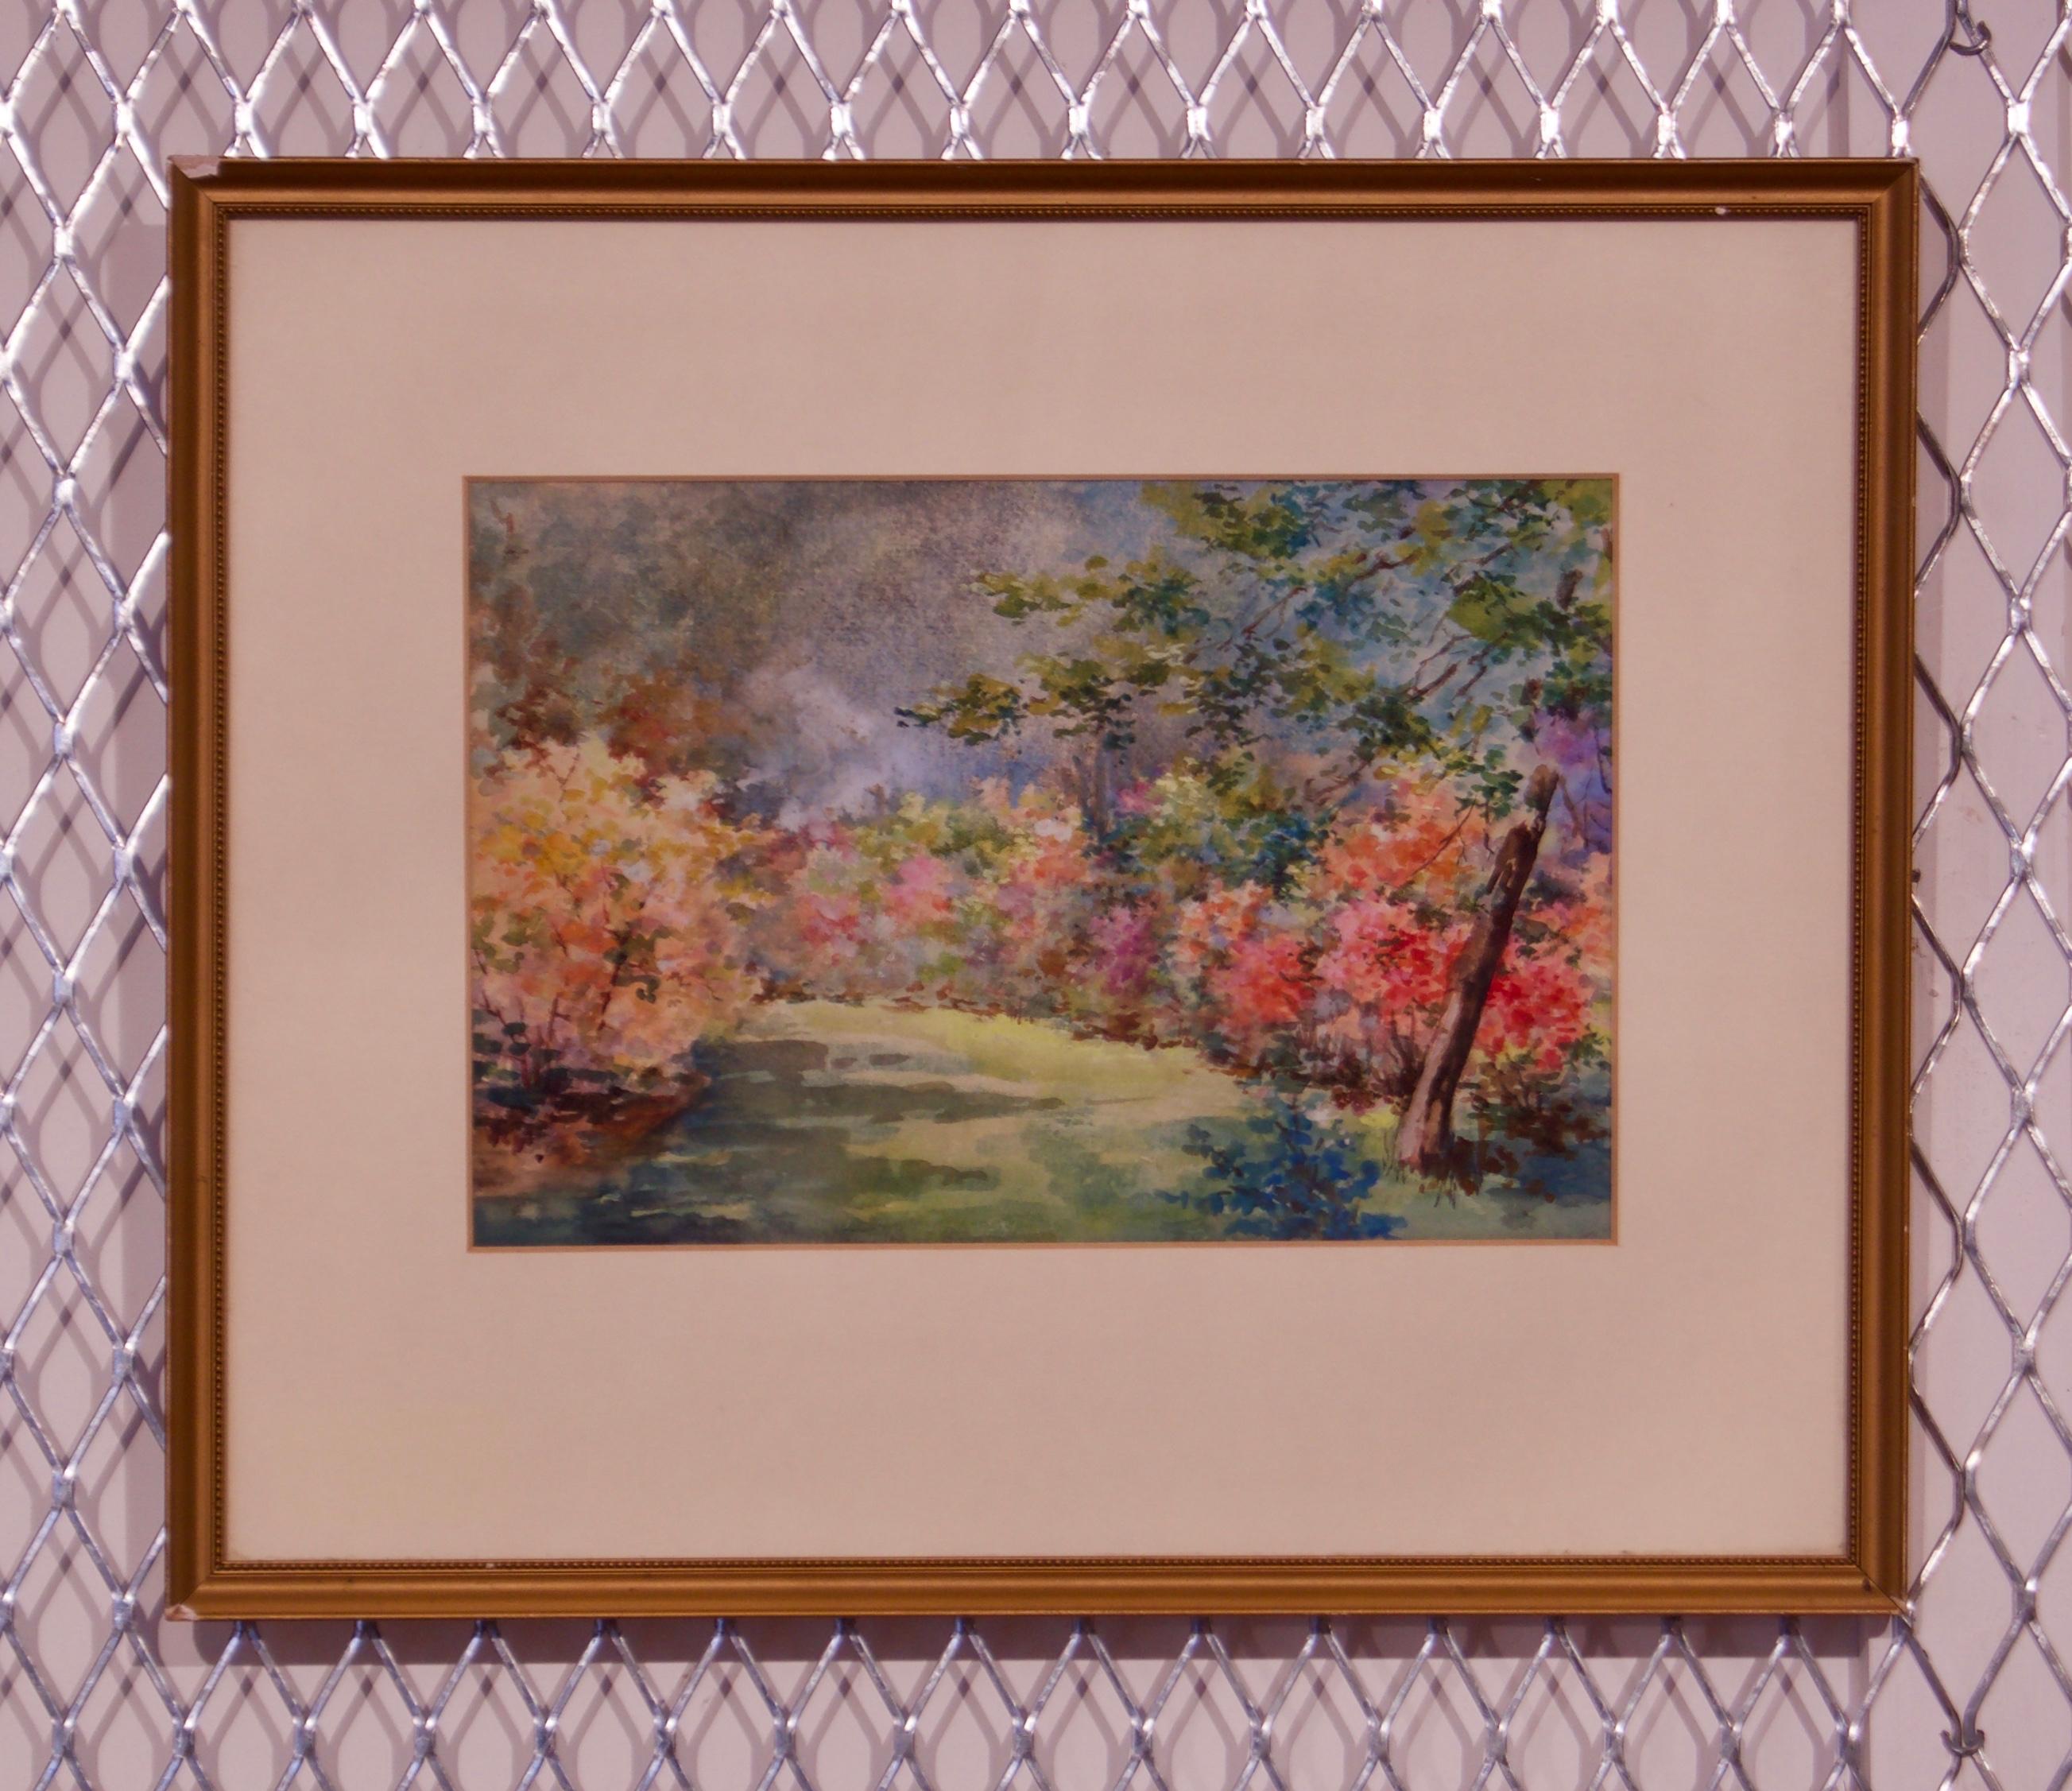 Floral Gardens - Early 20th Century Watercolor Landscape by Annie L Pressland For Sale 2